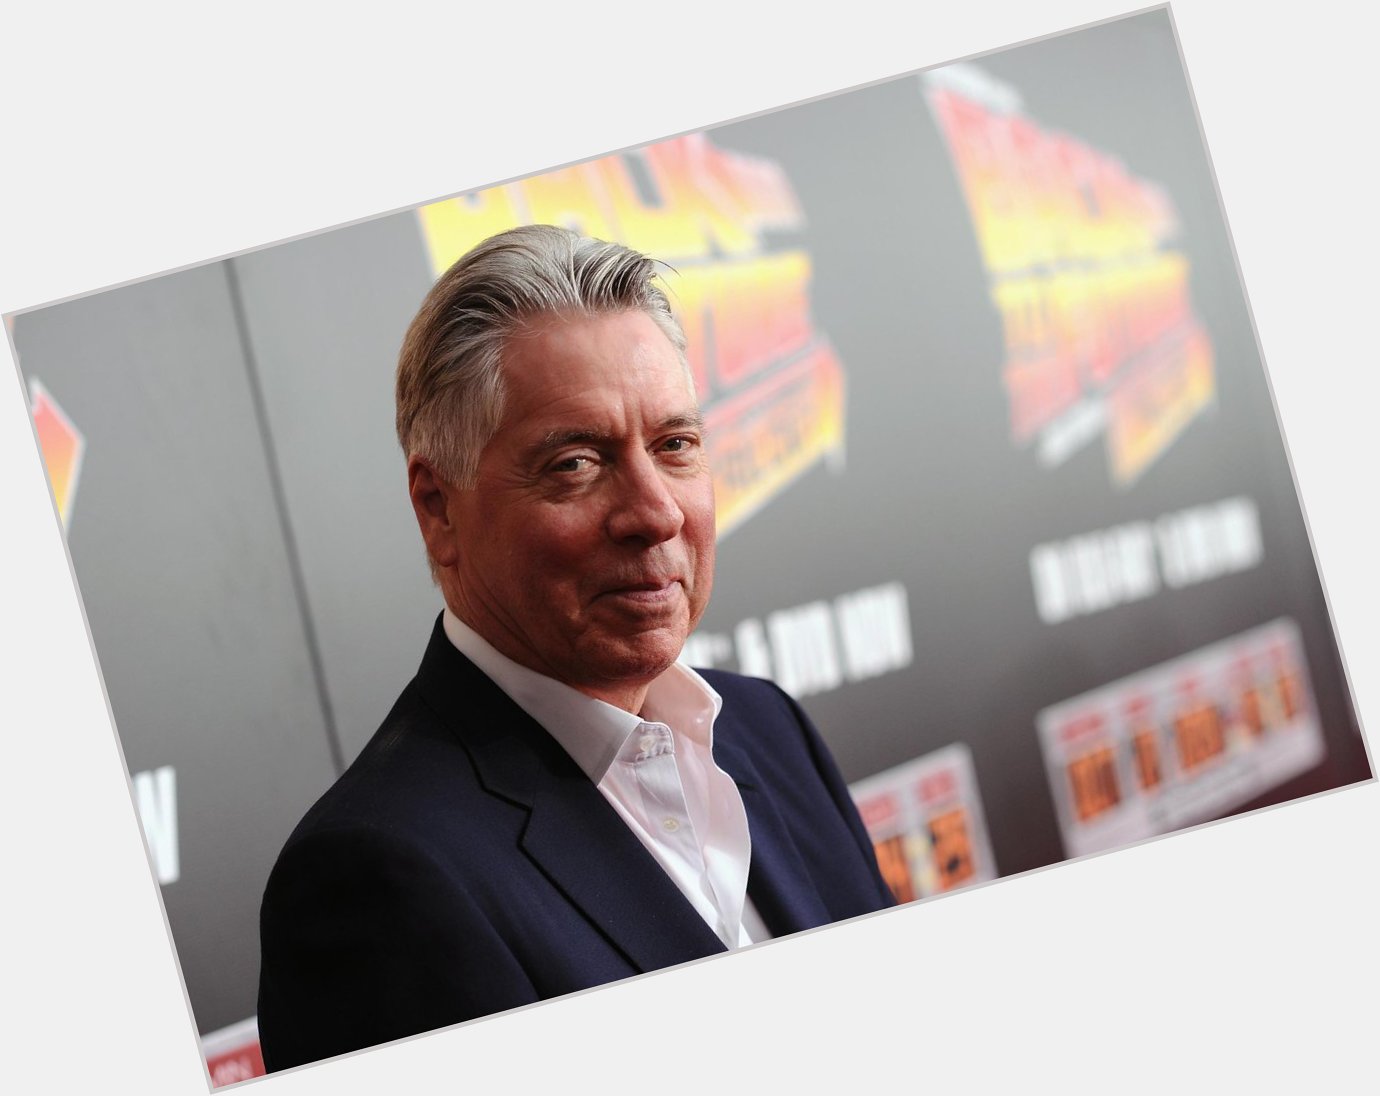 Happy Birthday wishes today to Composer, Alan Silvestri!  